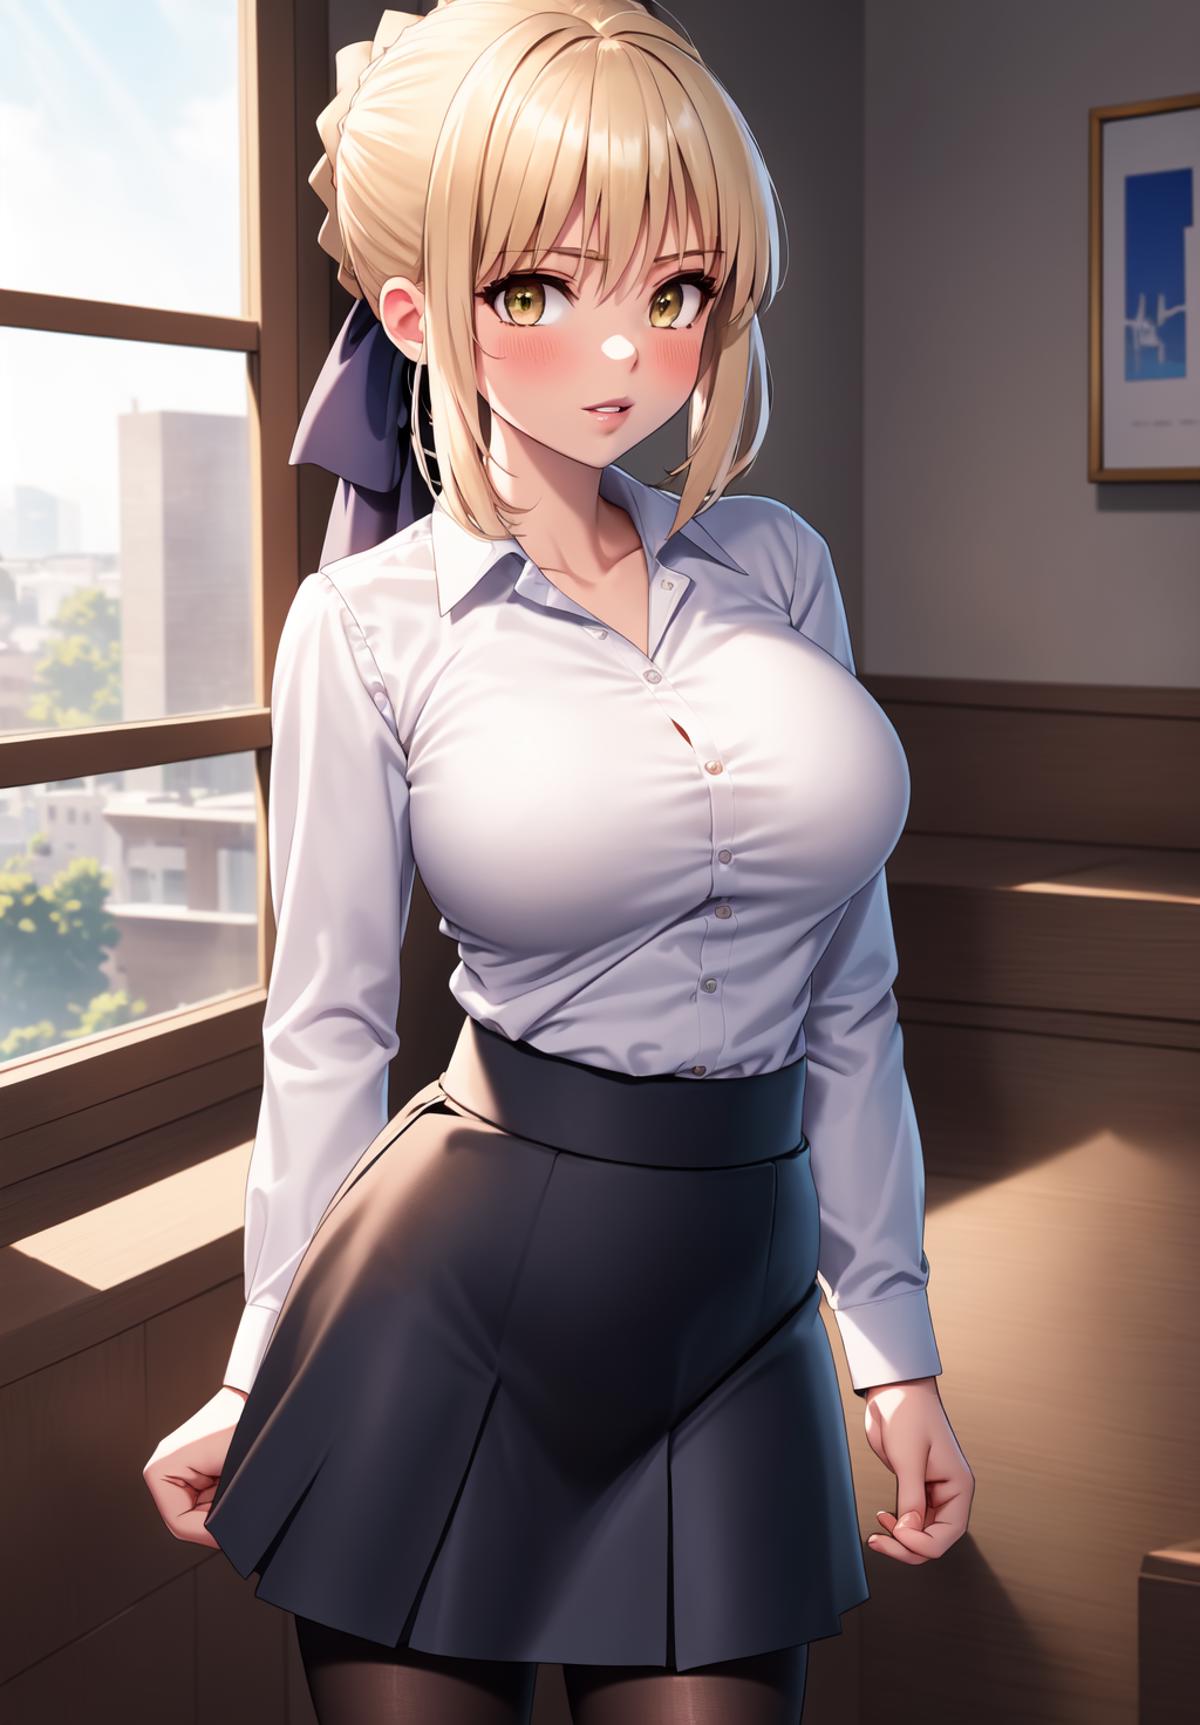 Saberface - Fate Series image by AsaTyr